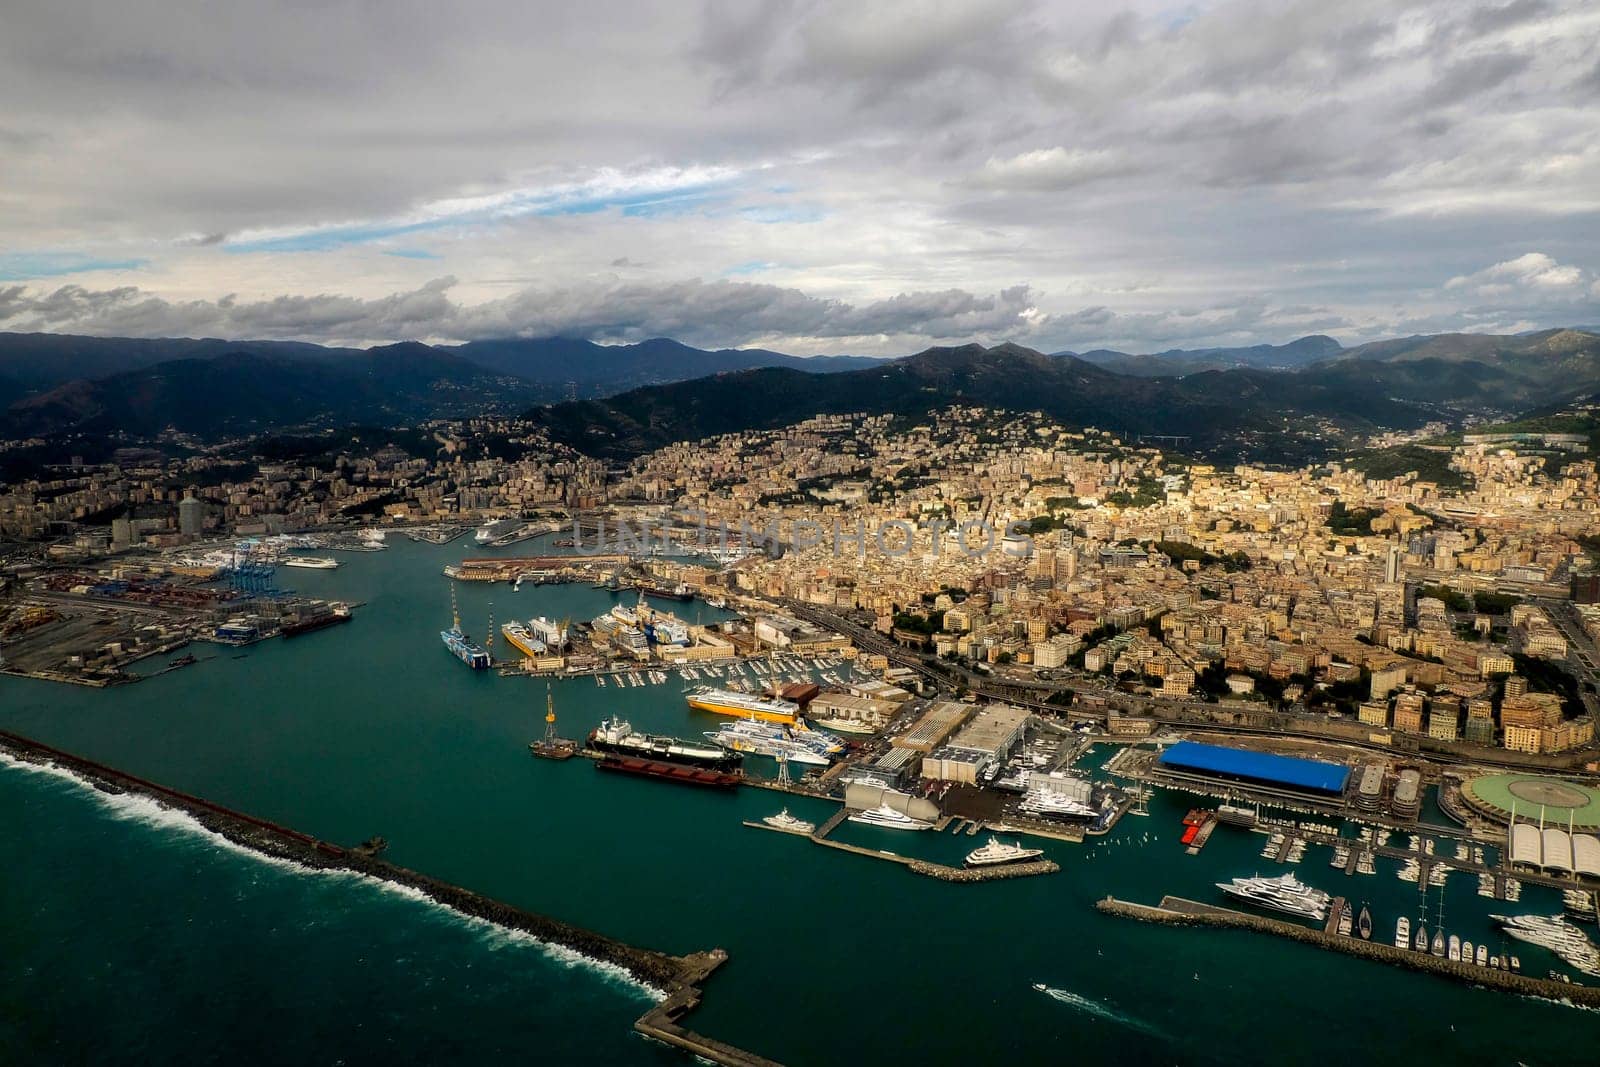 Foce Genoa aerial view before landing to airport by airplane during a sea storm tempest hurricane by AndreaIzzotti